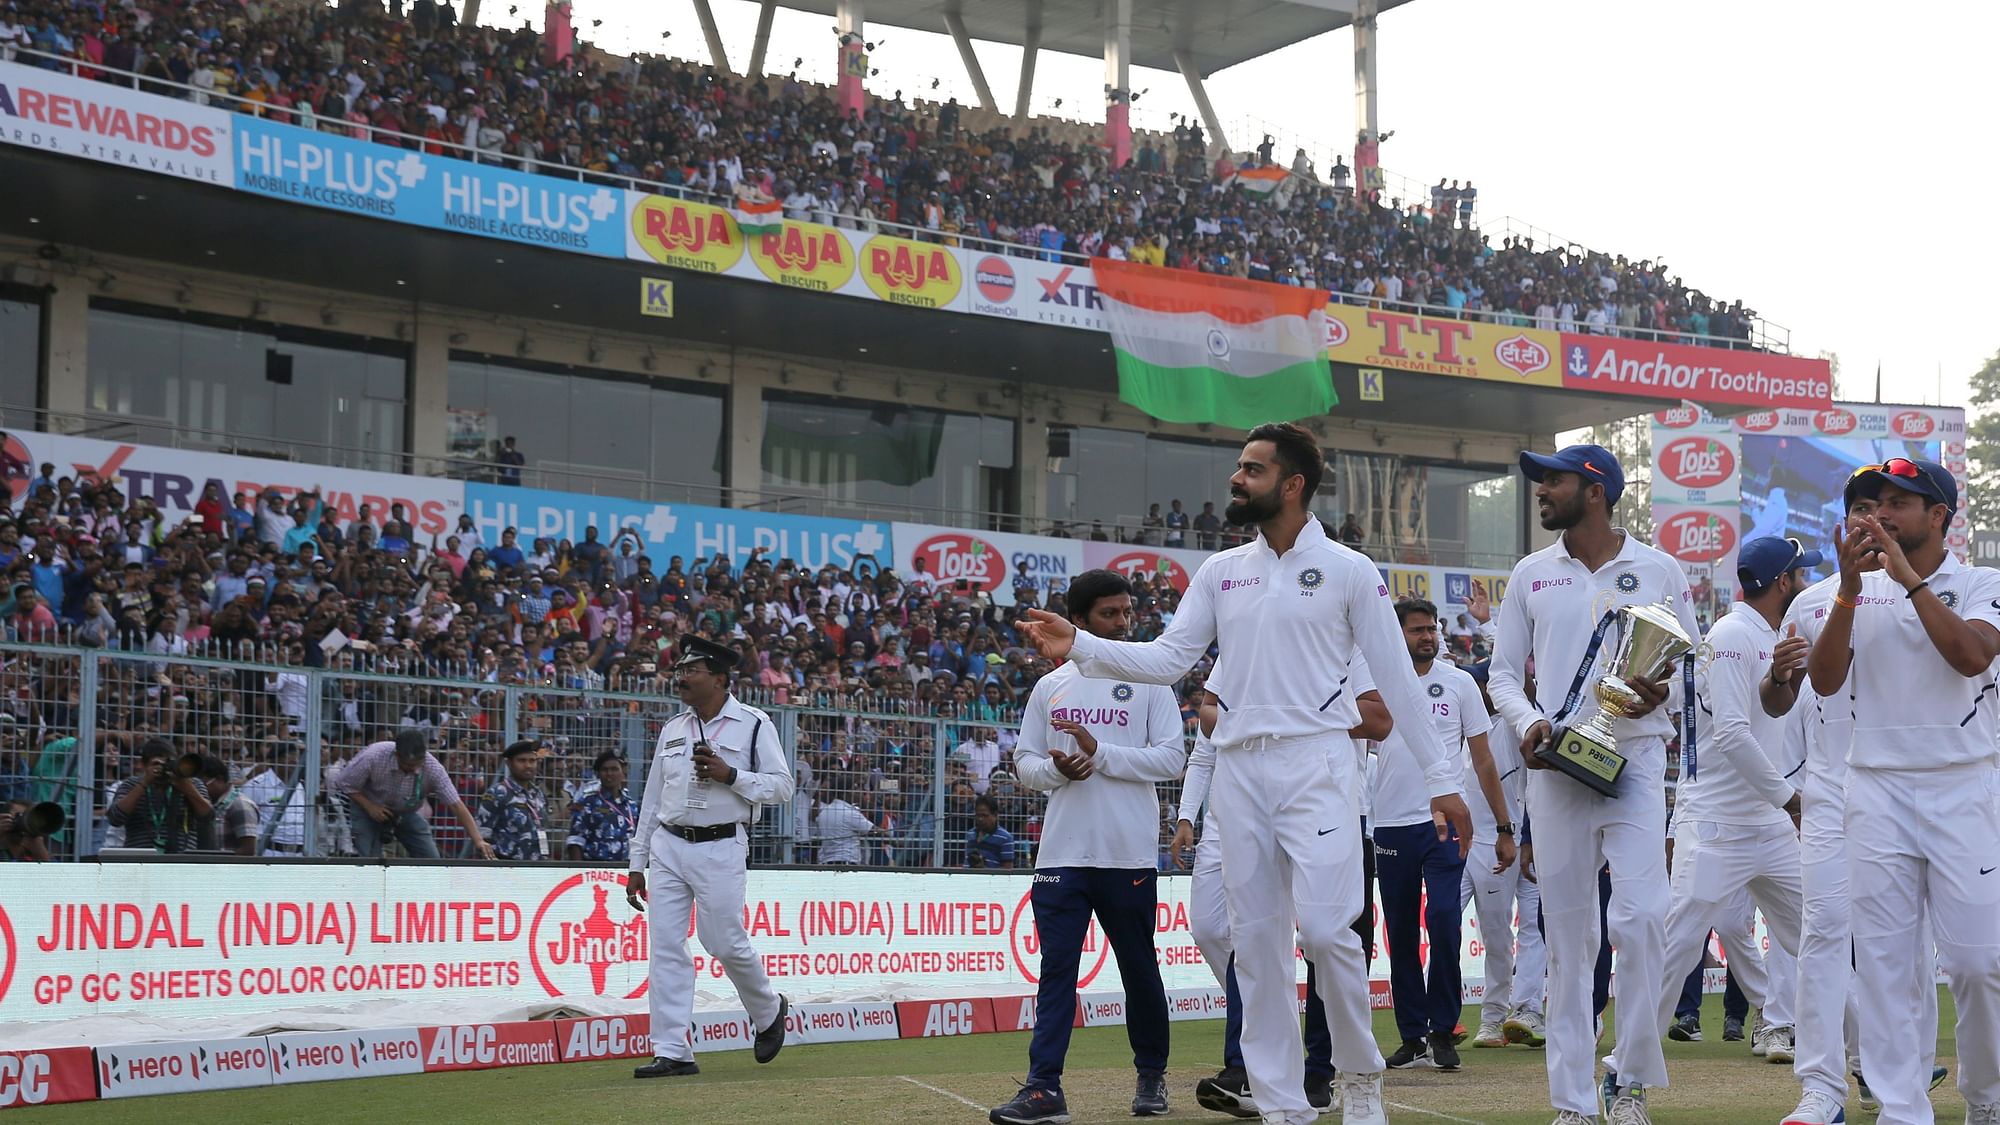 The Cricket Association of Bengal (CAB) will refund Day 4 and Day 5 tickets of the Day-night Test.